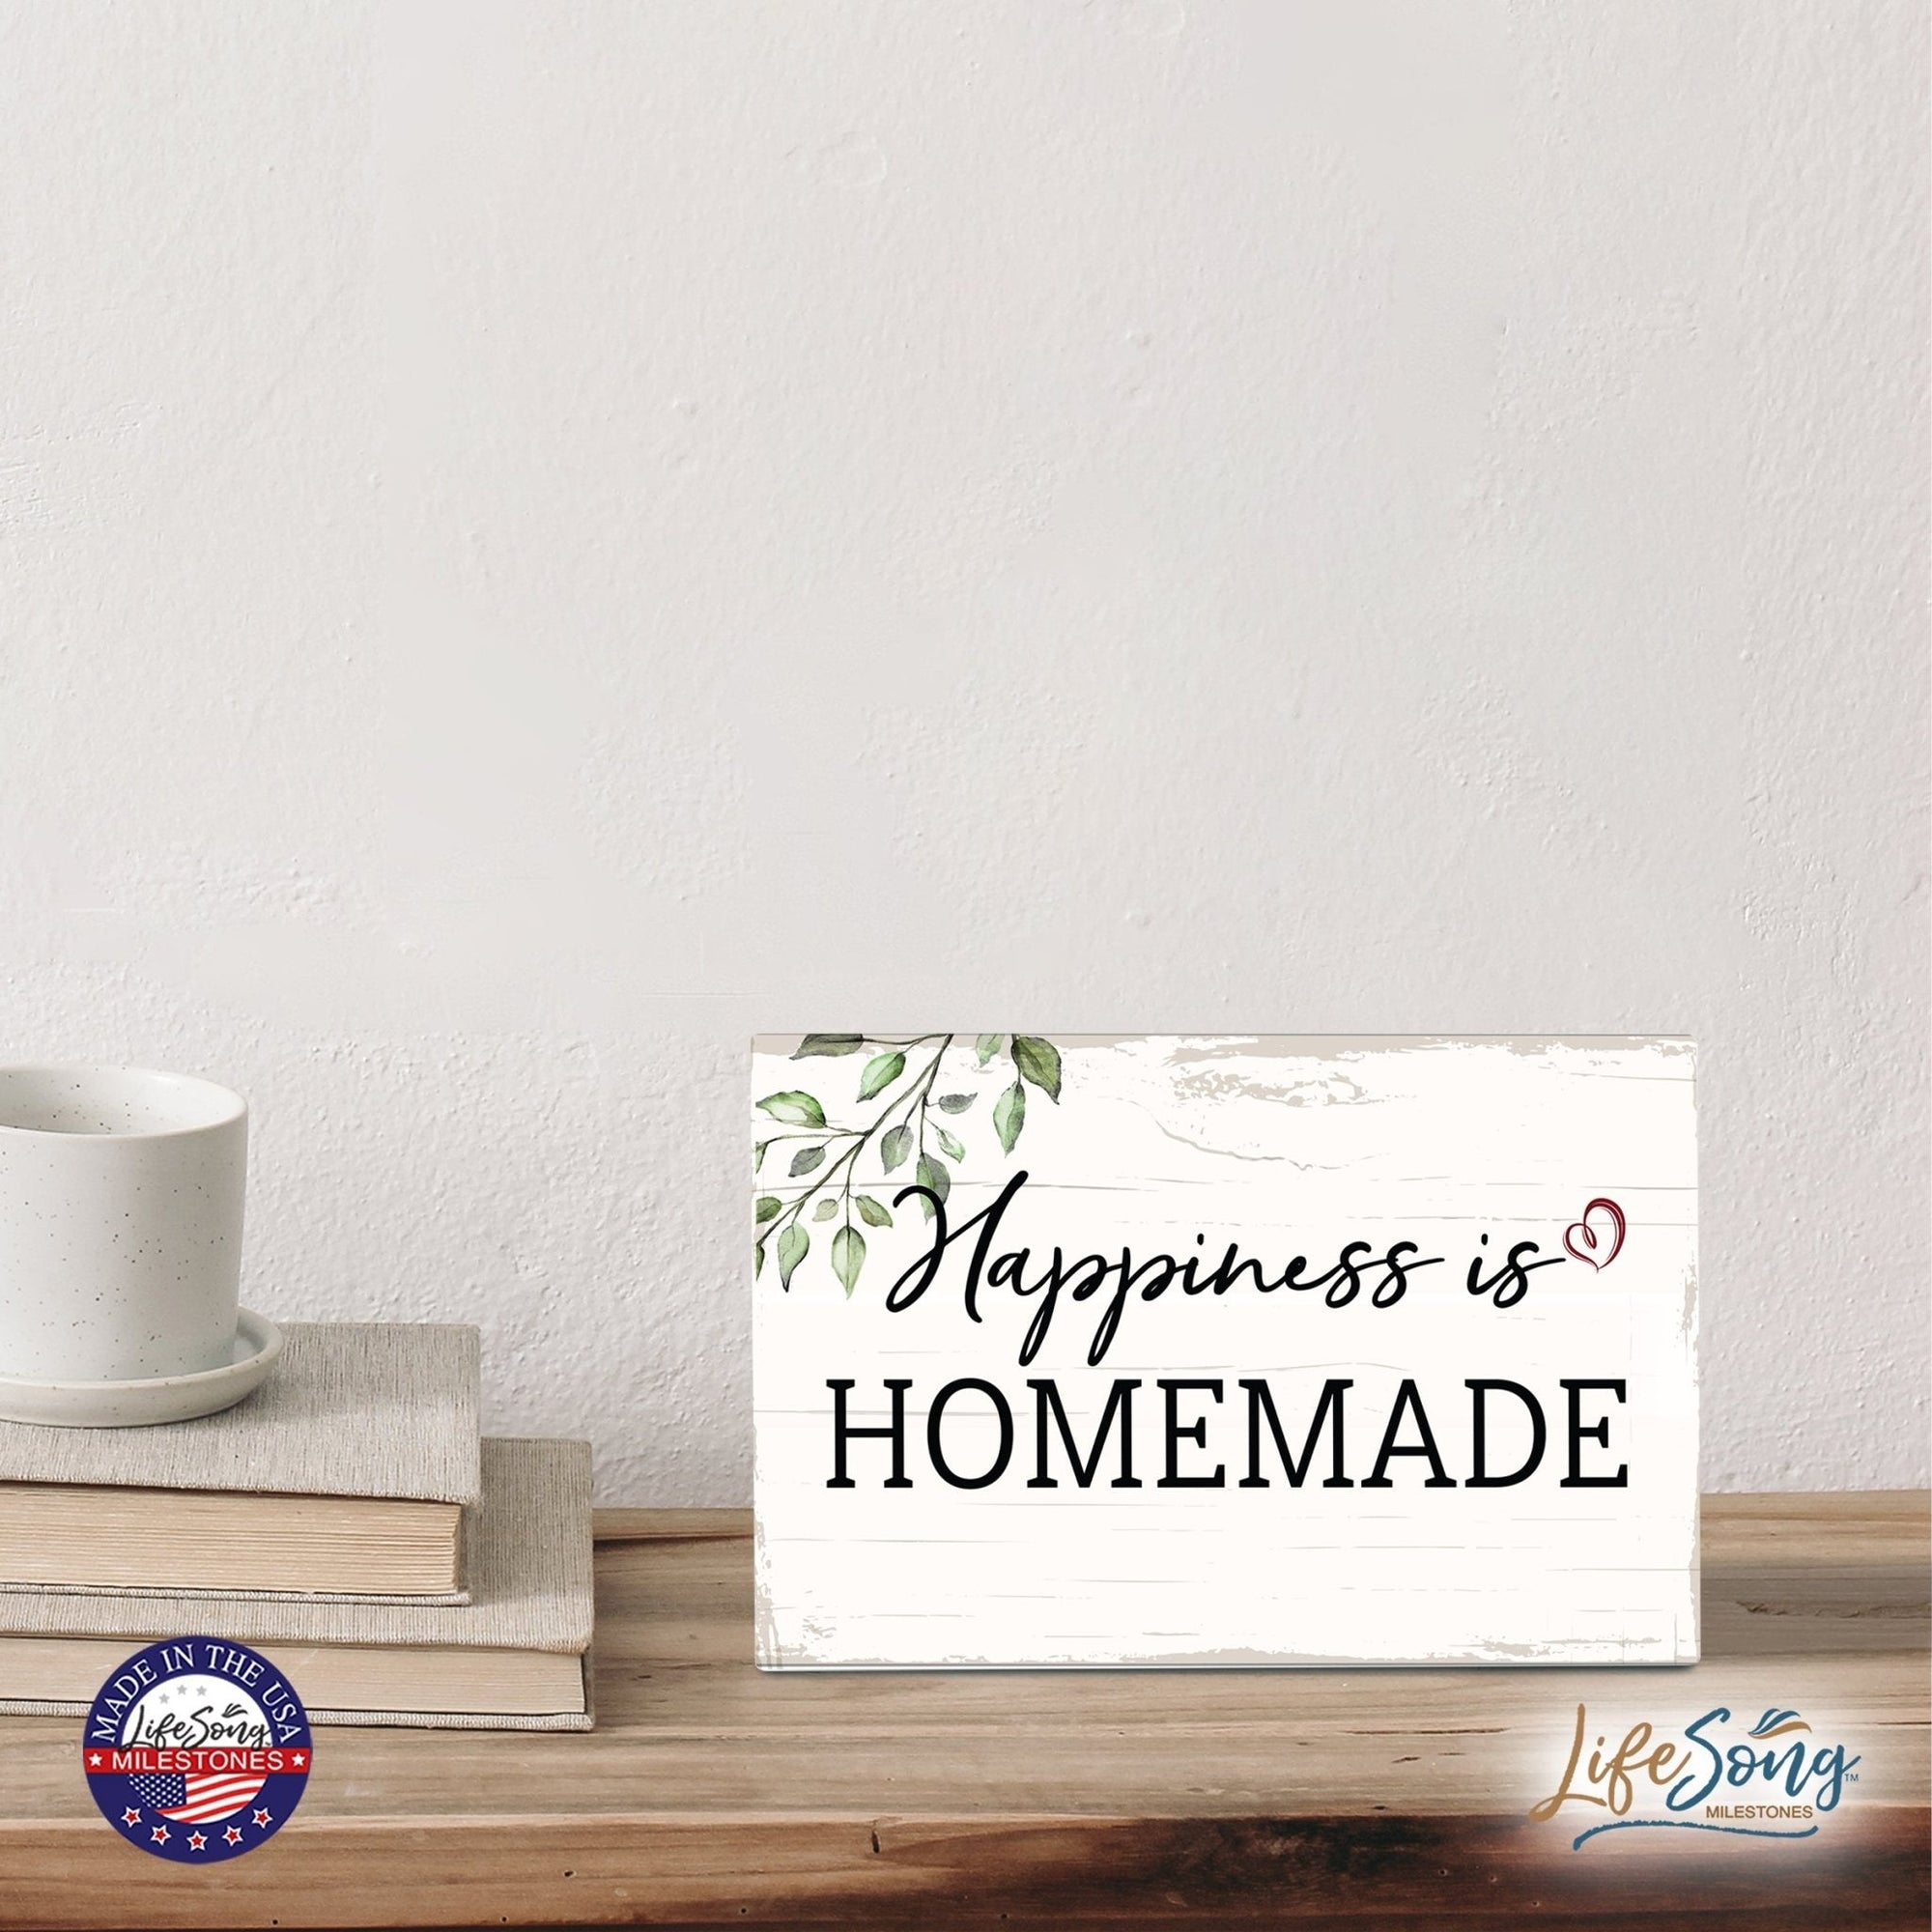 Modern Inspirational 5.5x8in Wooden Plaque Family And Home Tabletop Decor - Happiness Is Homemade - LifeSong Milestones